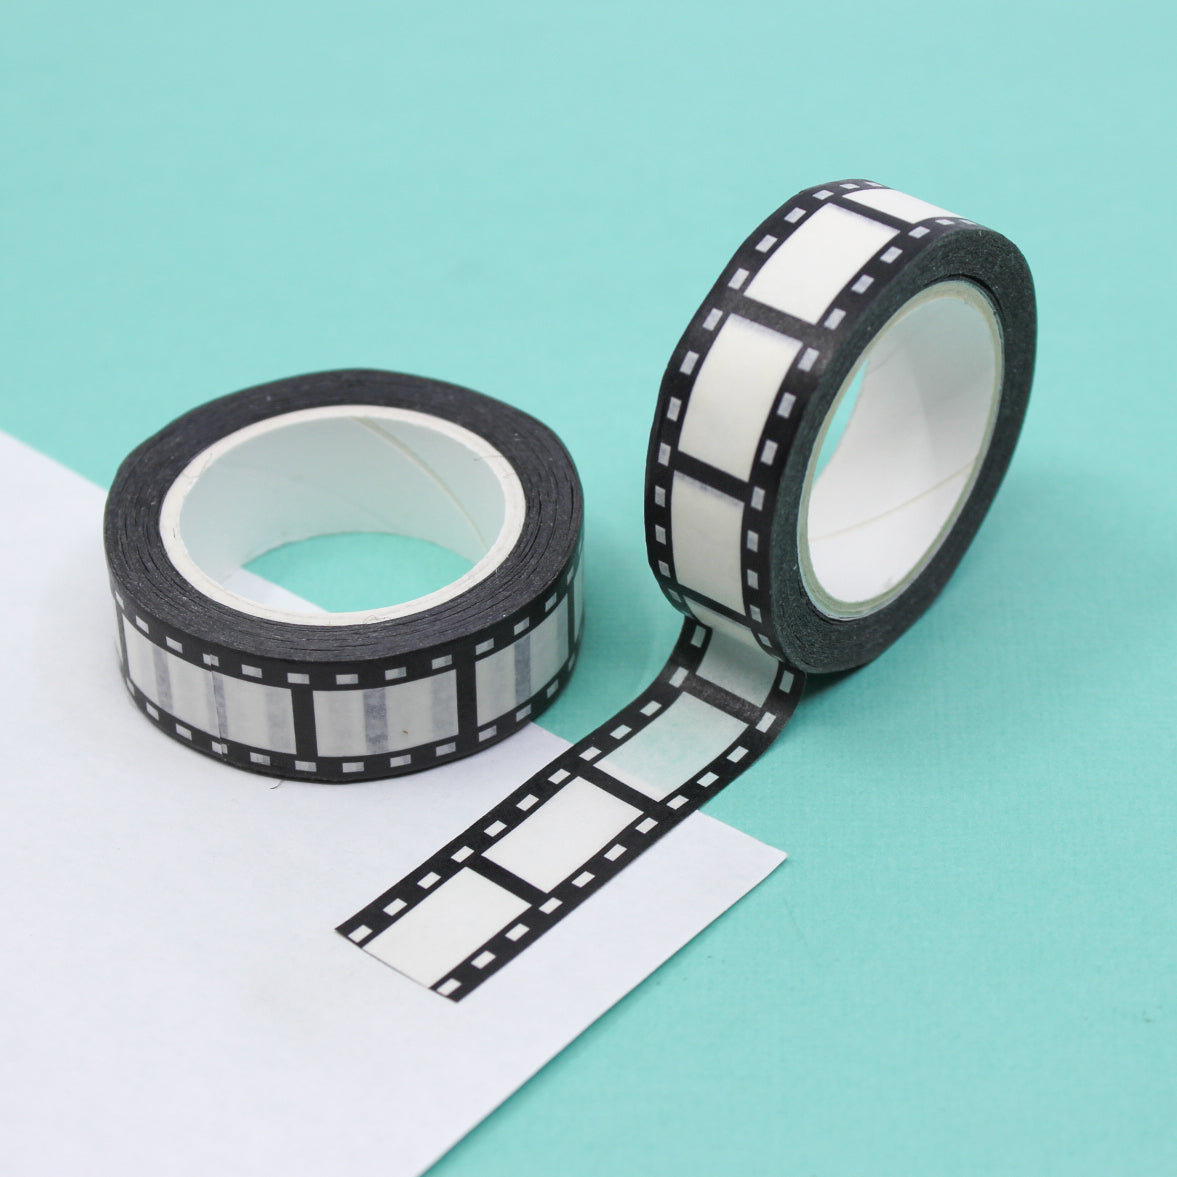 This is our standard 15mm size film strip washi tape that is perfect for your journaling and craft projects. This tape is sold at BBB Supplies Craft shop. 